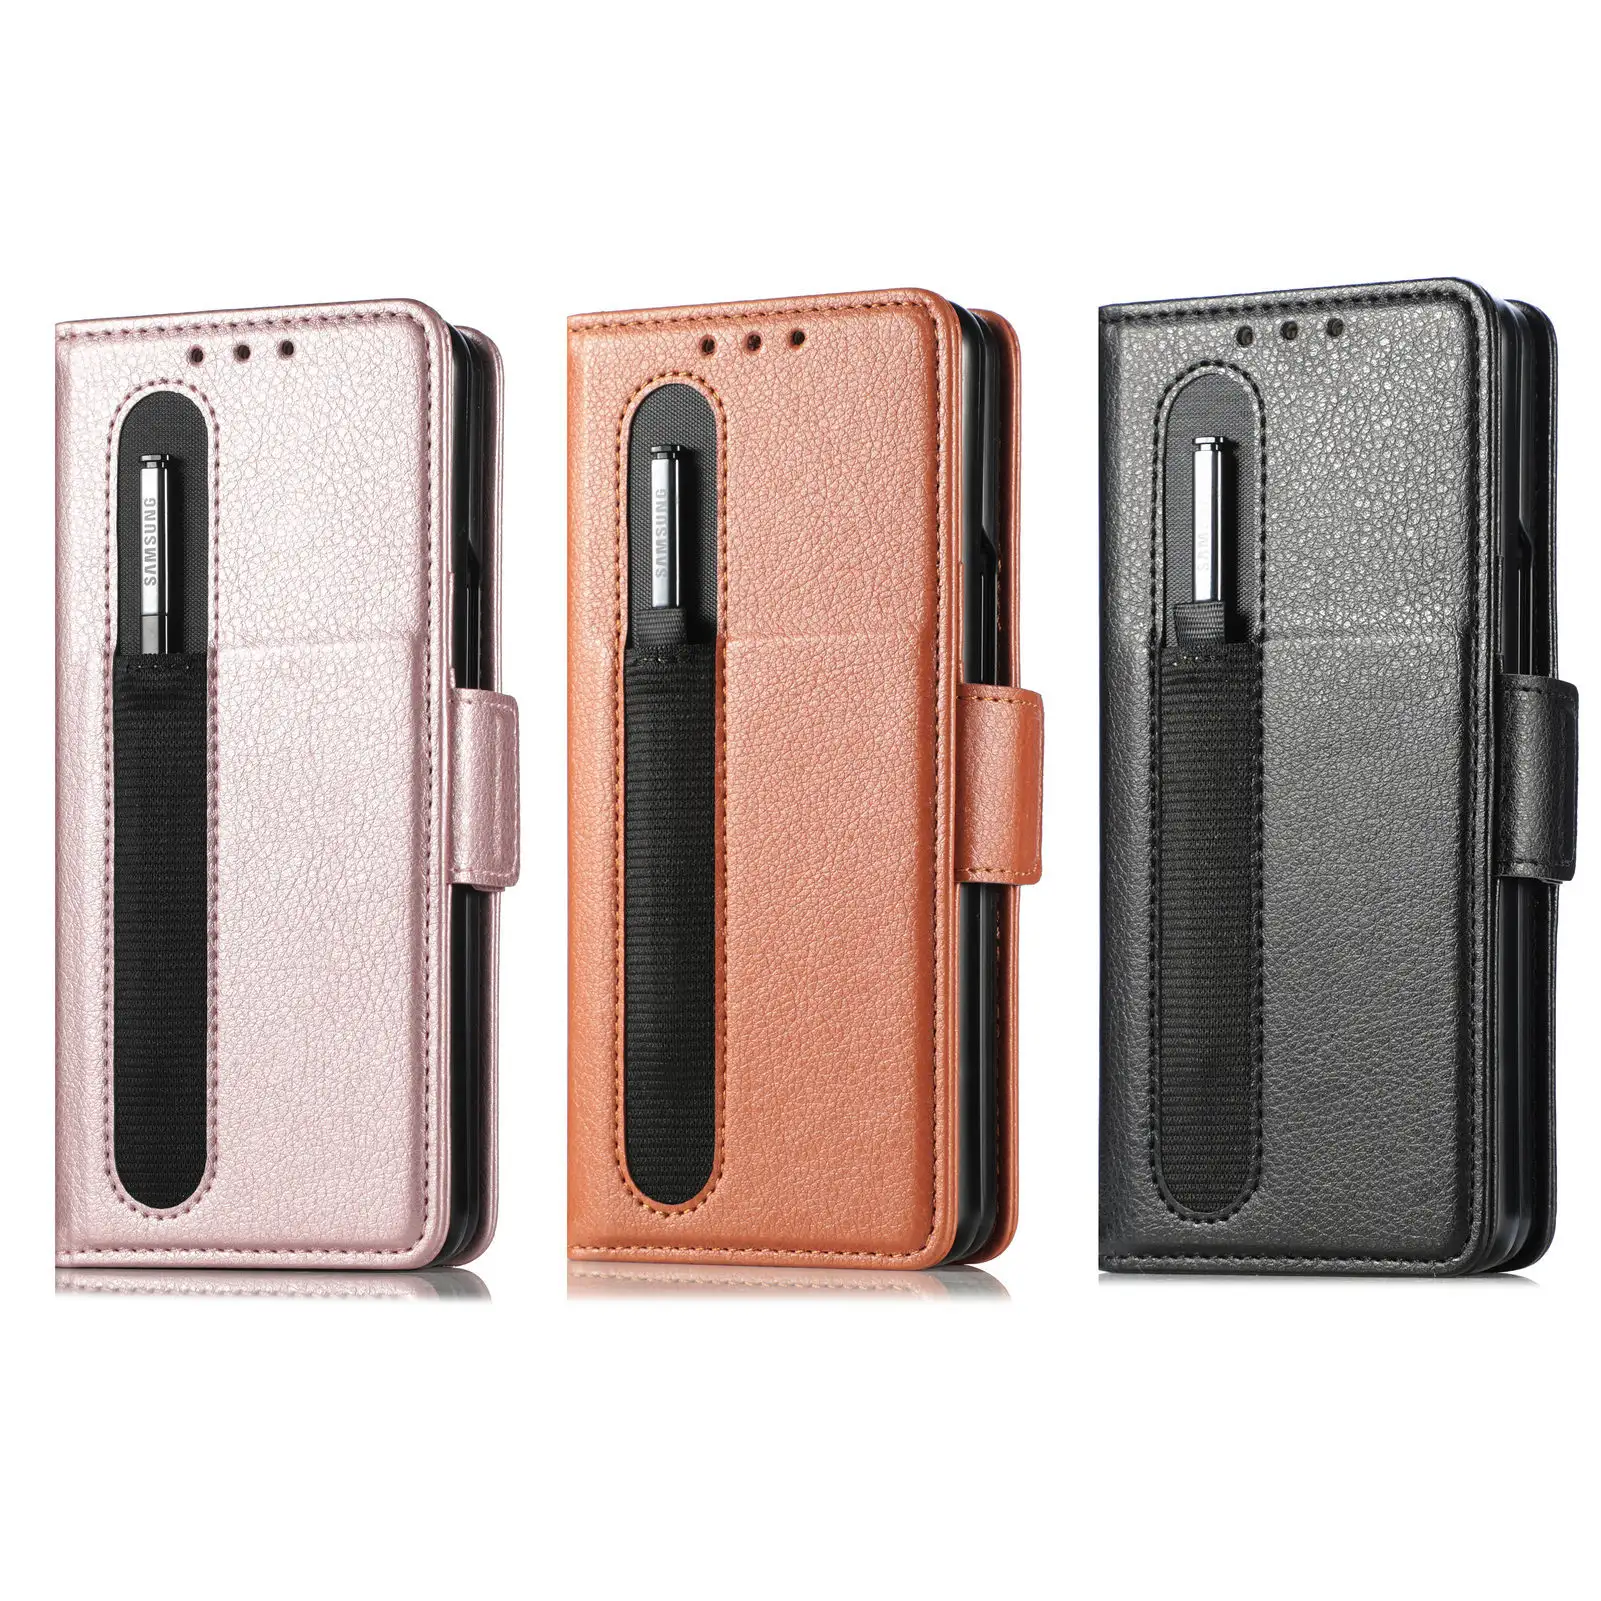 Hot selling mobile phone leather case business solid color pen slot pen Z Fold3/4 multi-card sleeve is suitable for z fold4